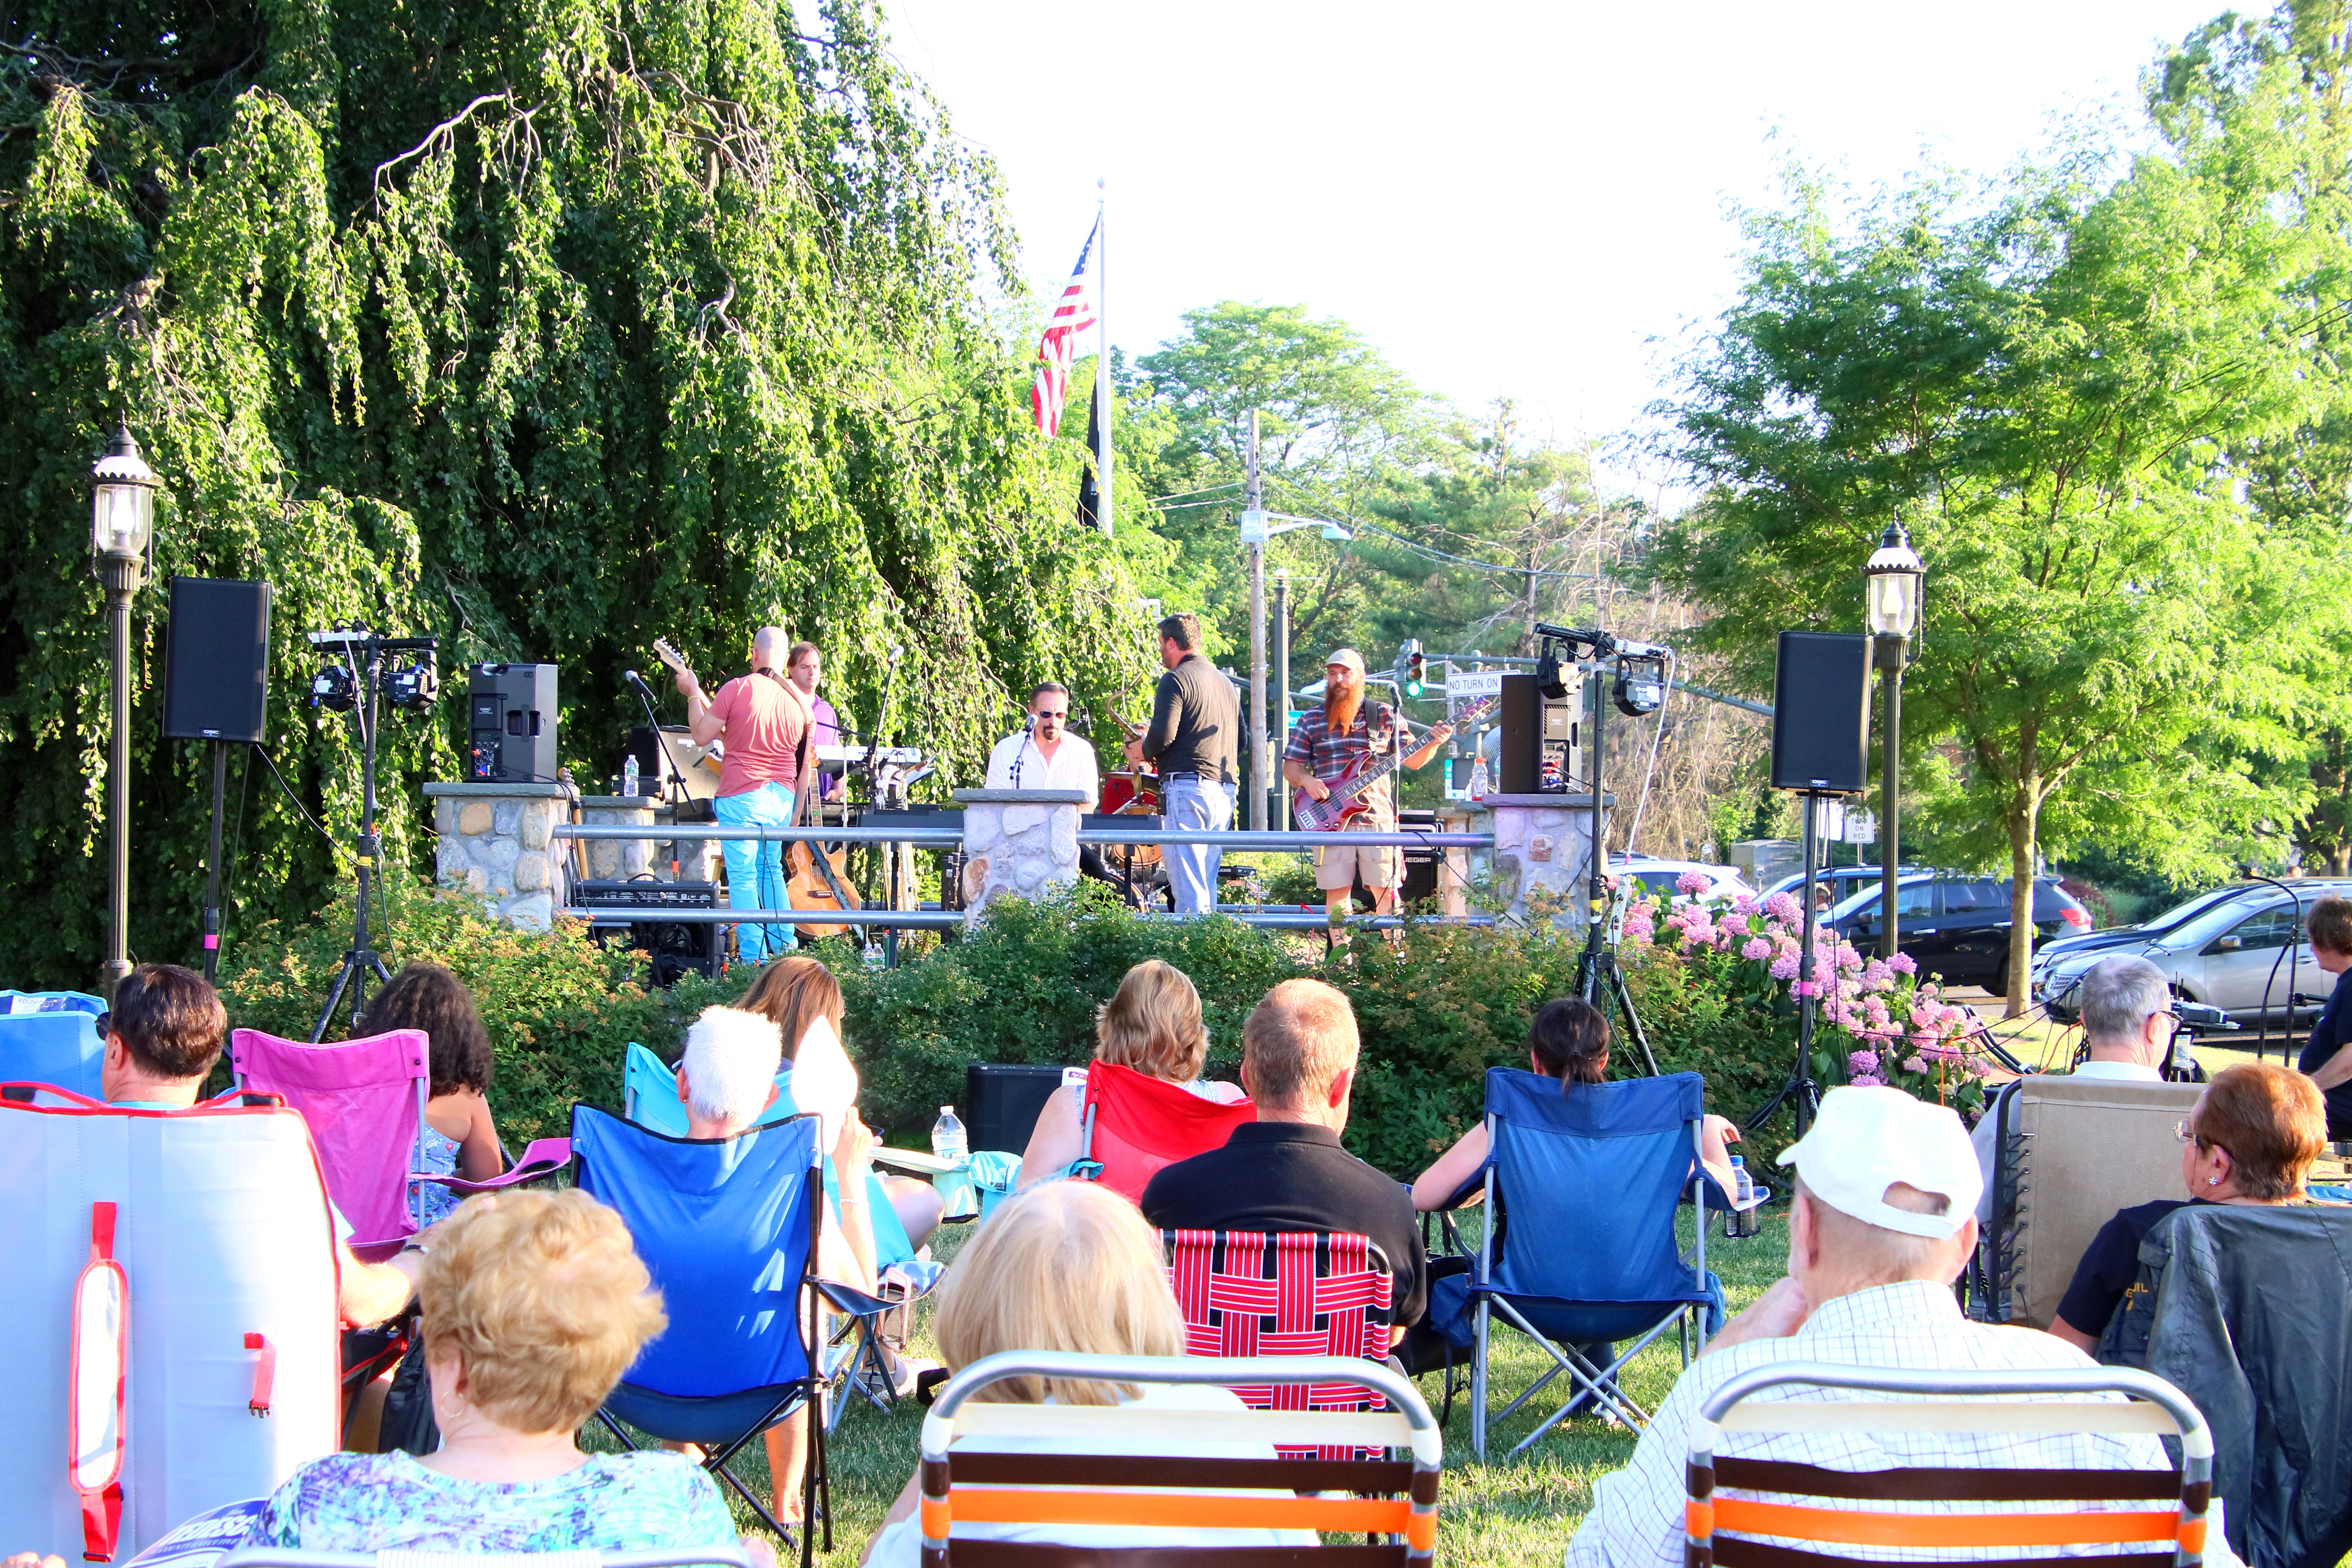 Free concerts sound good this summer! — Pascack Press & Northern Valley